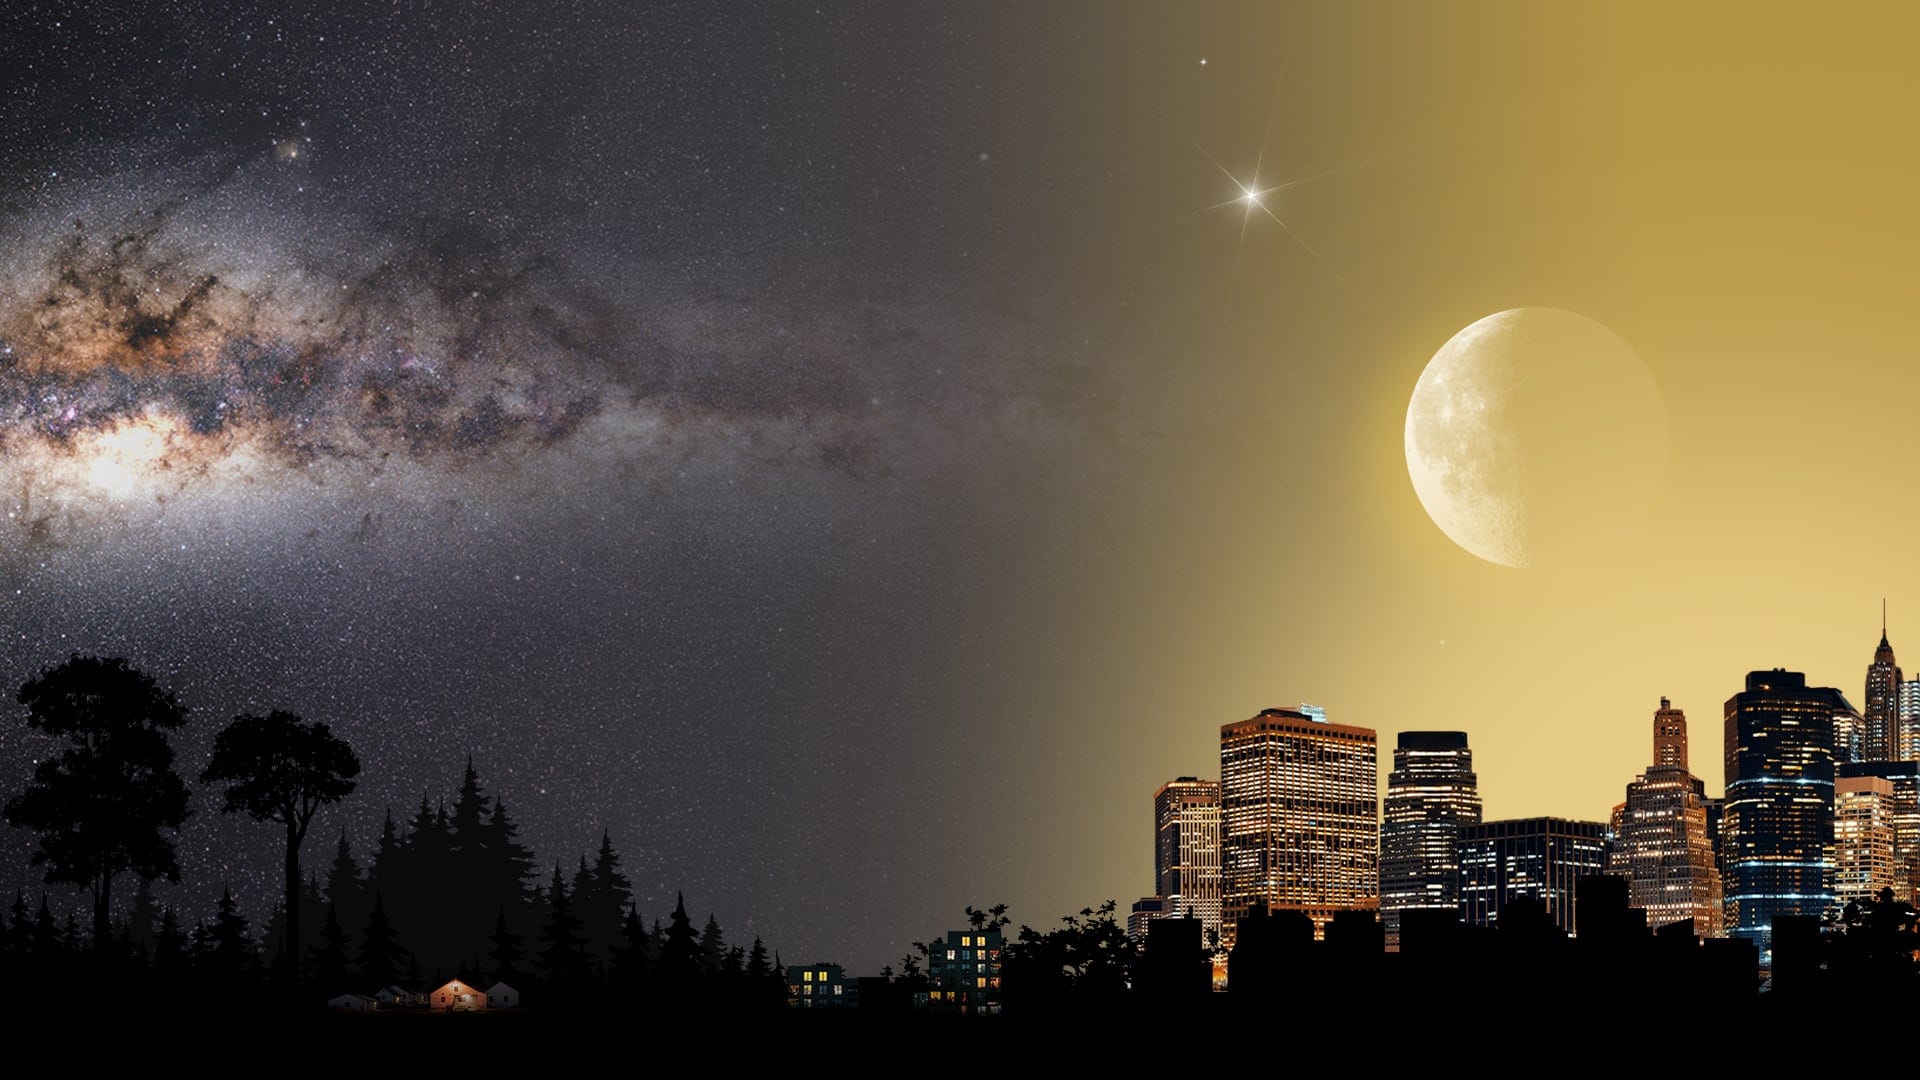 Bortle Scale of Light Pollution